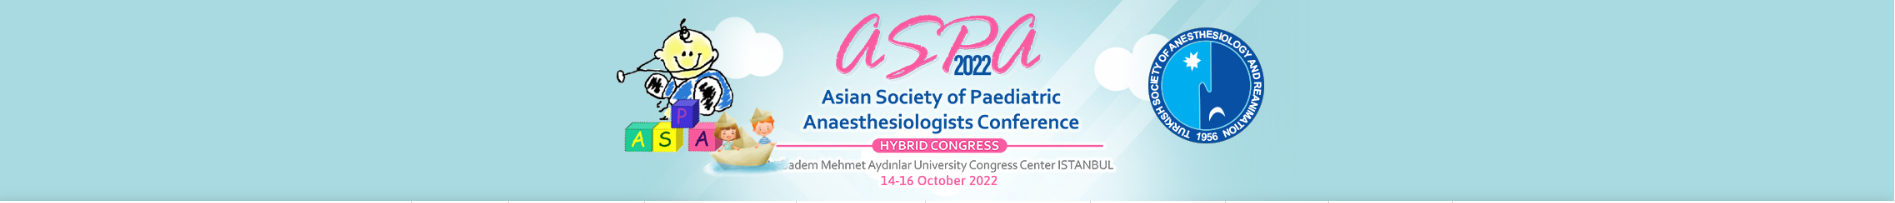 Asian Society of Paediatric Anaesthesiologists Conference -ASPA 2022